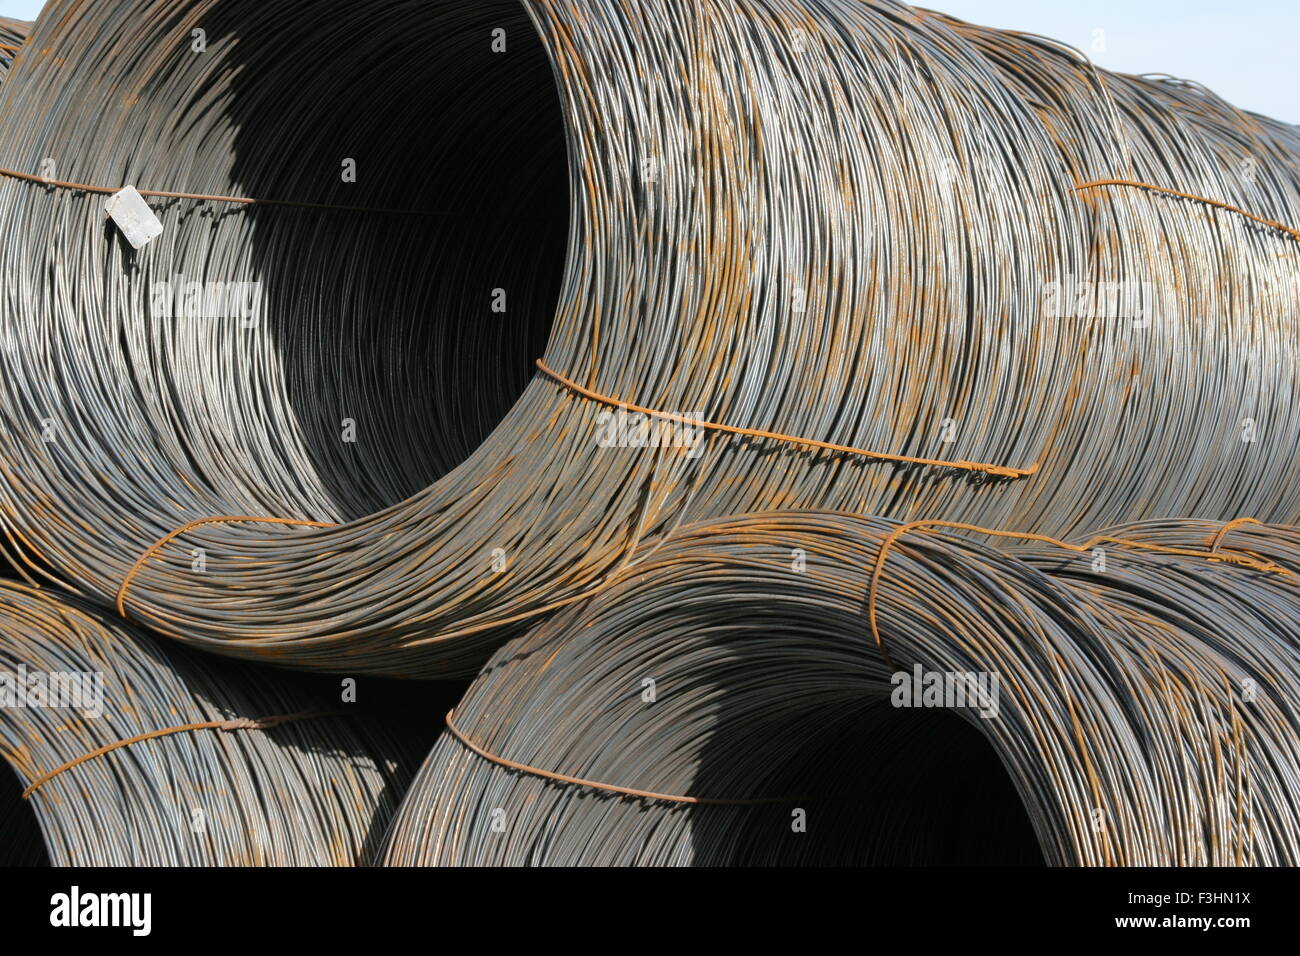 steel coils imported at port Stock Photo